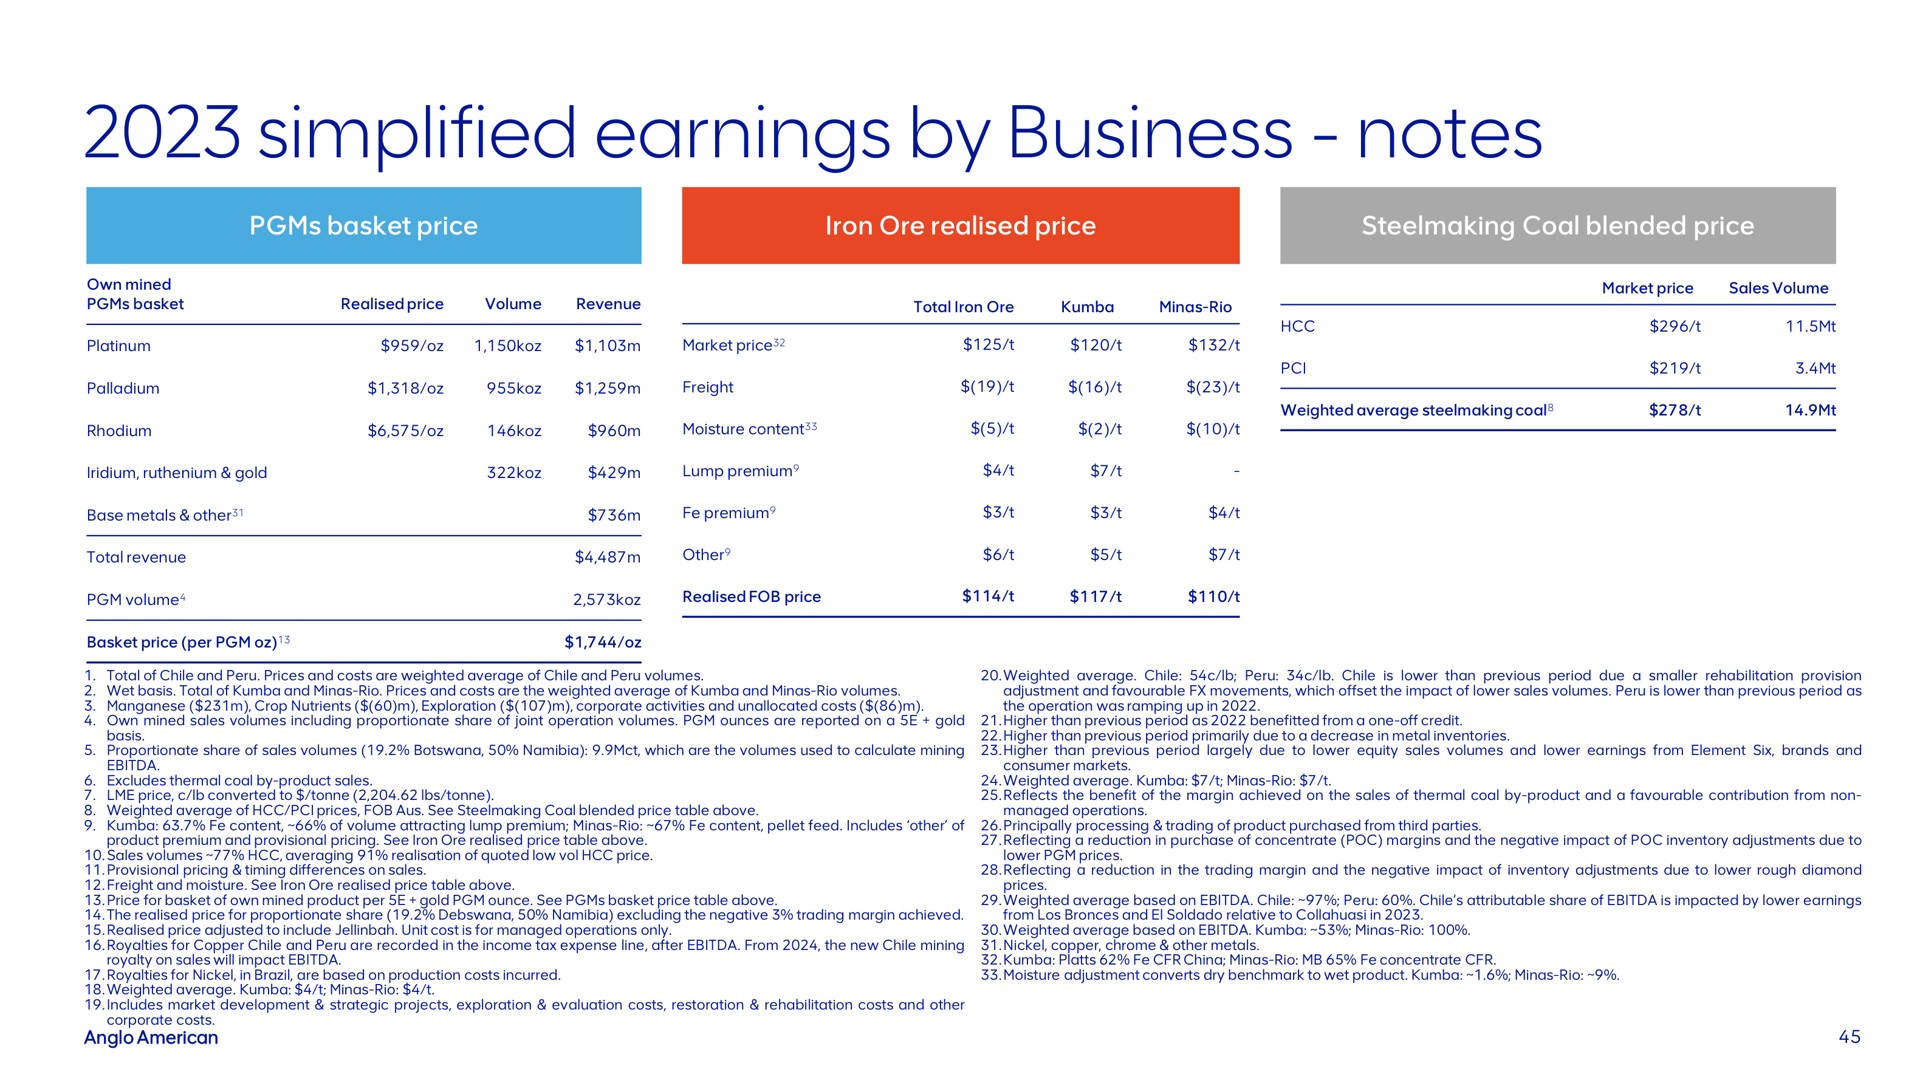 simplified earnings by business notes | AngloAmerican